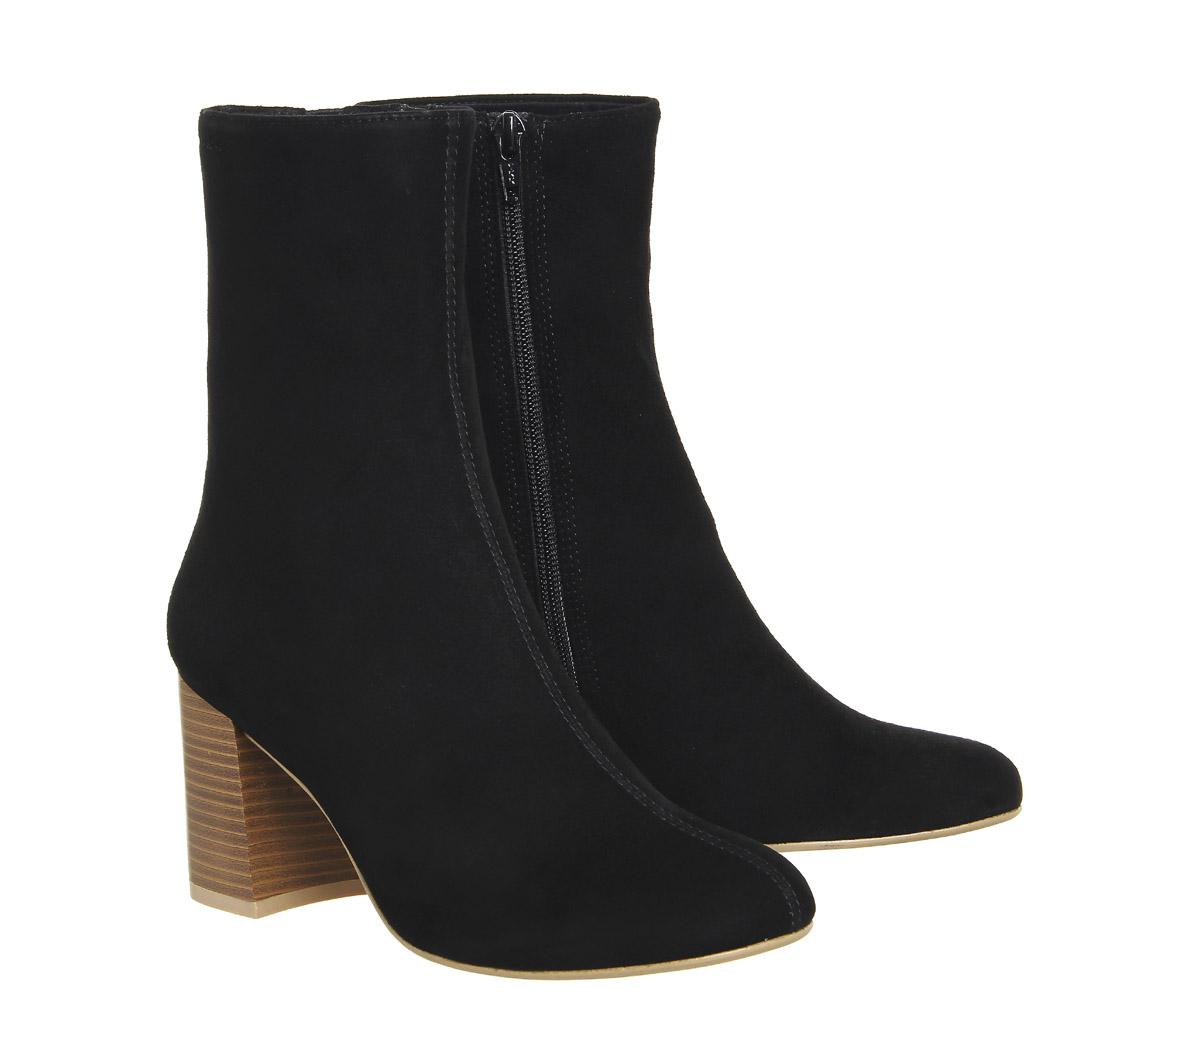 Suede Mid Boots in Black Lyst